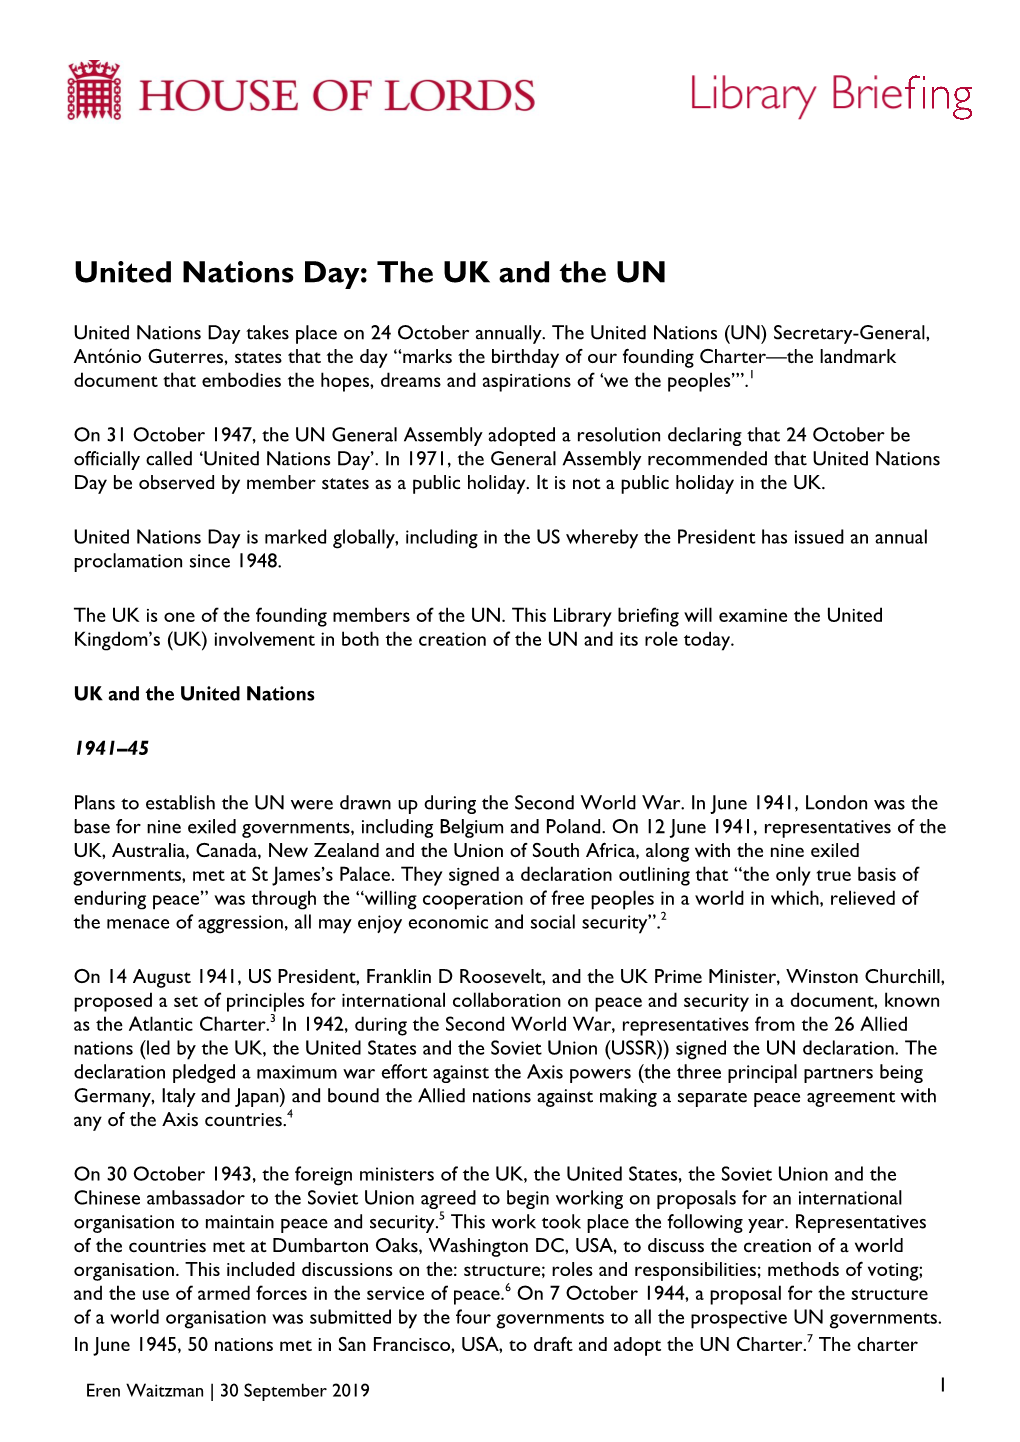 United Nations Day: the UK and the UN